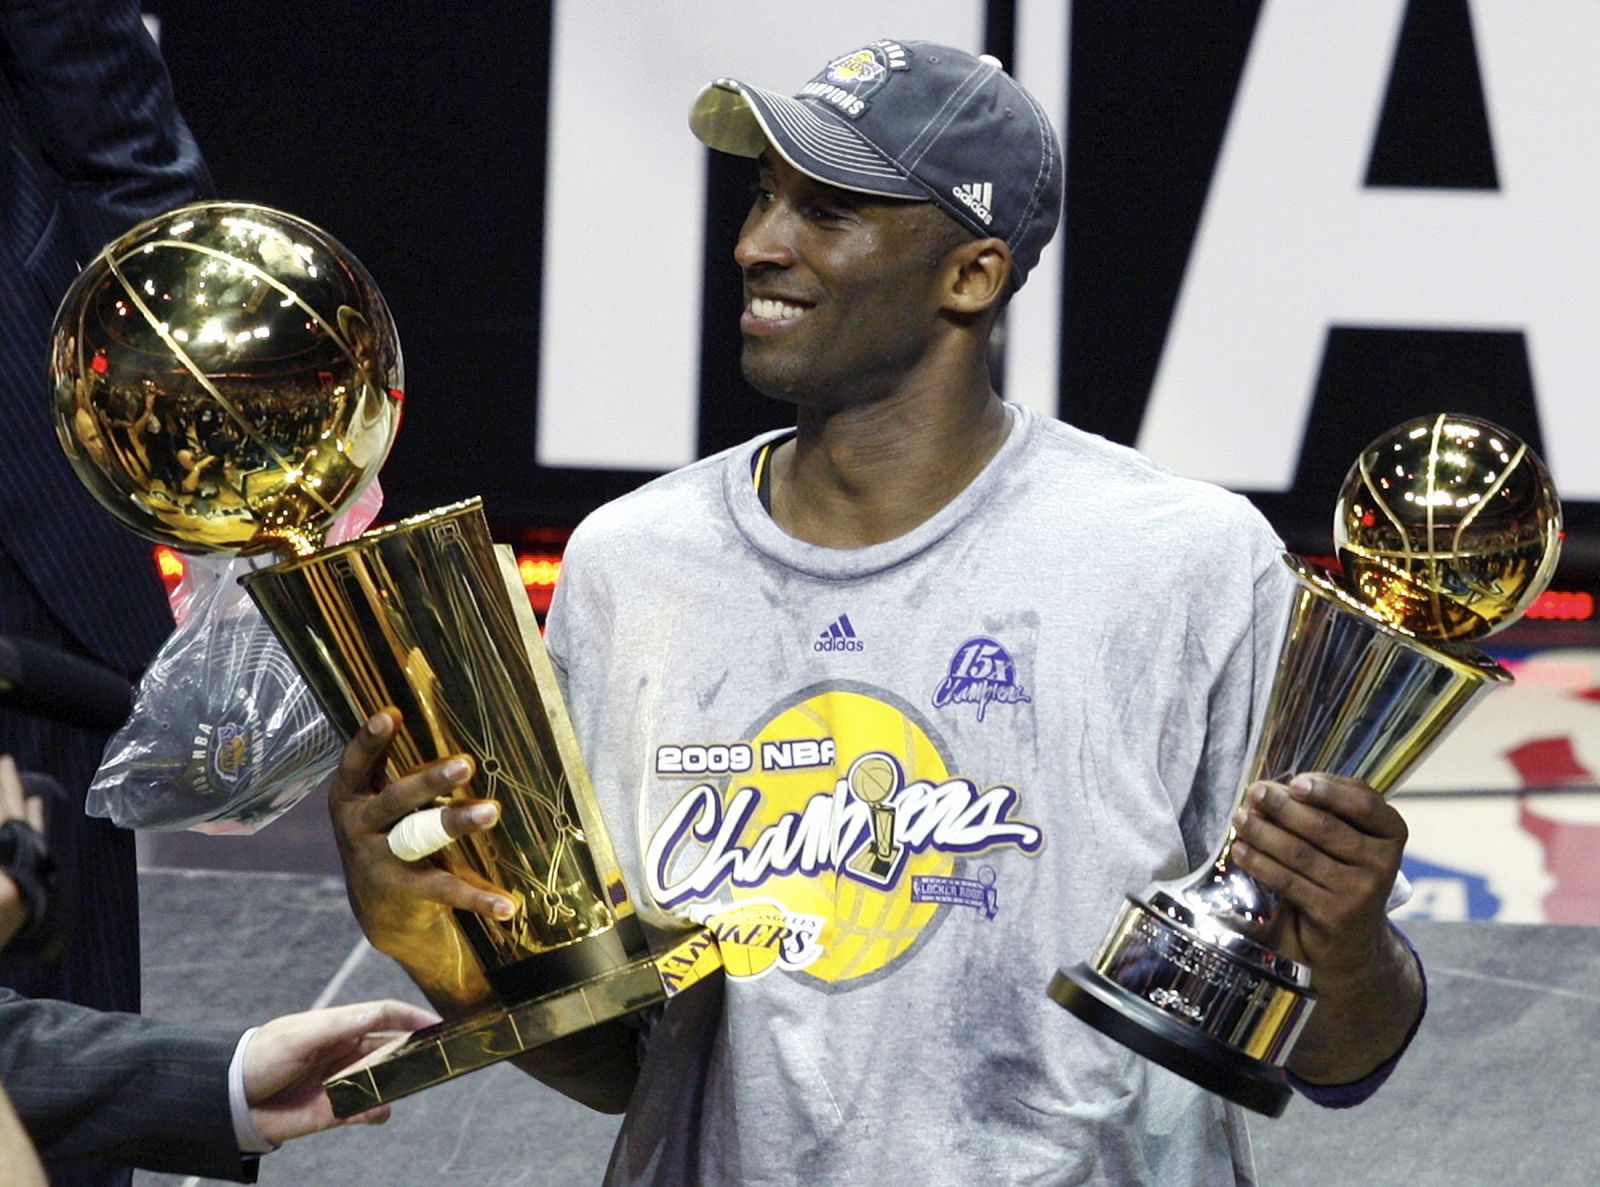 Los Angeles Lakers Kobe Bryant holds trophies after they defeated the Orlando Magic to win the NBA basketball championship in Orlando